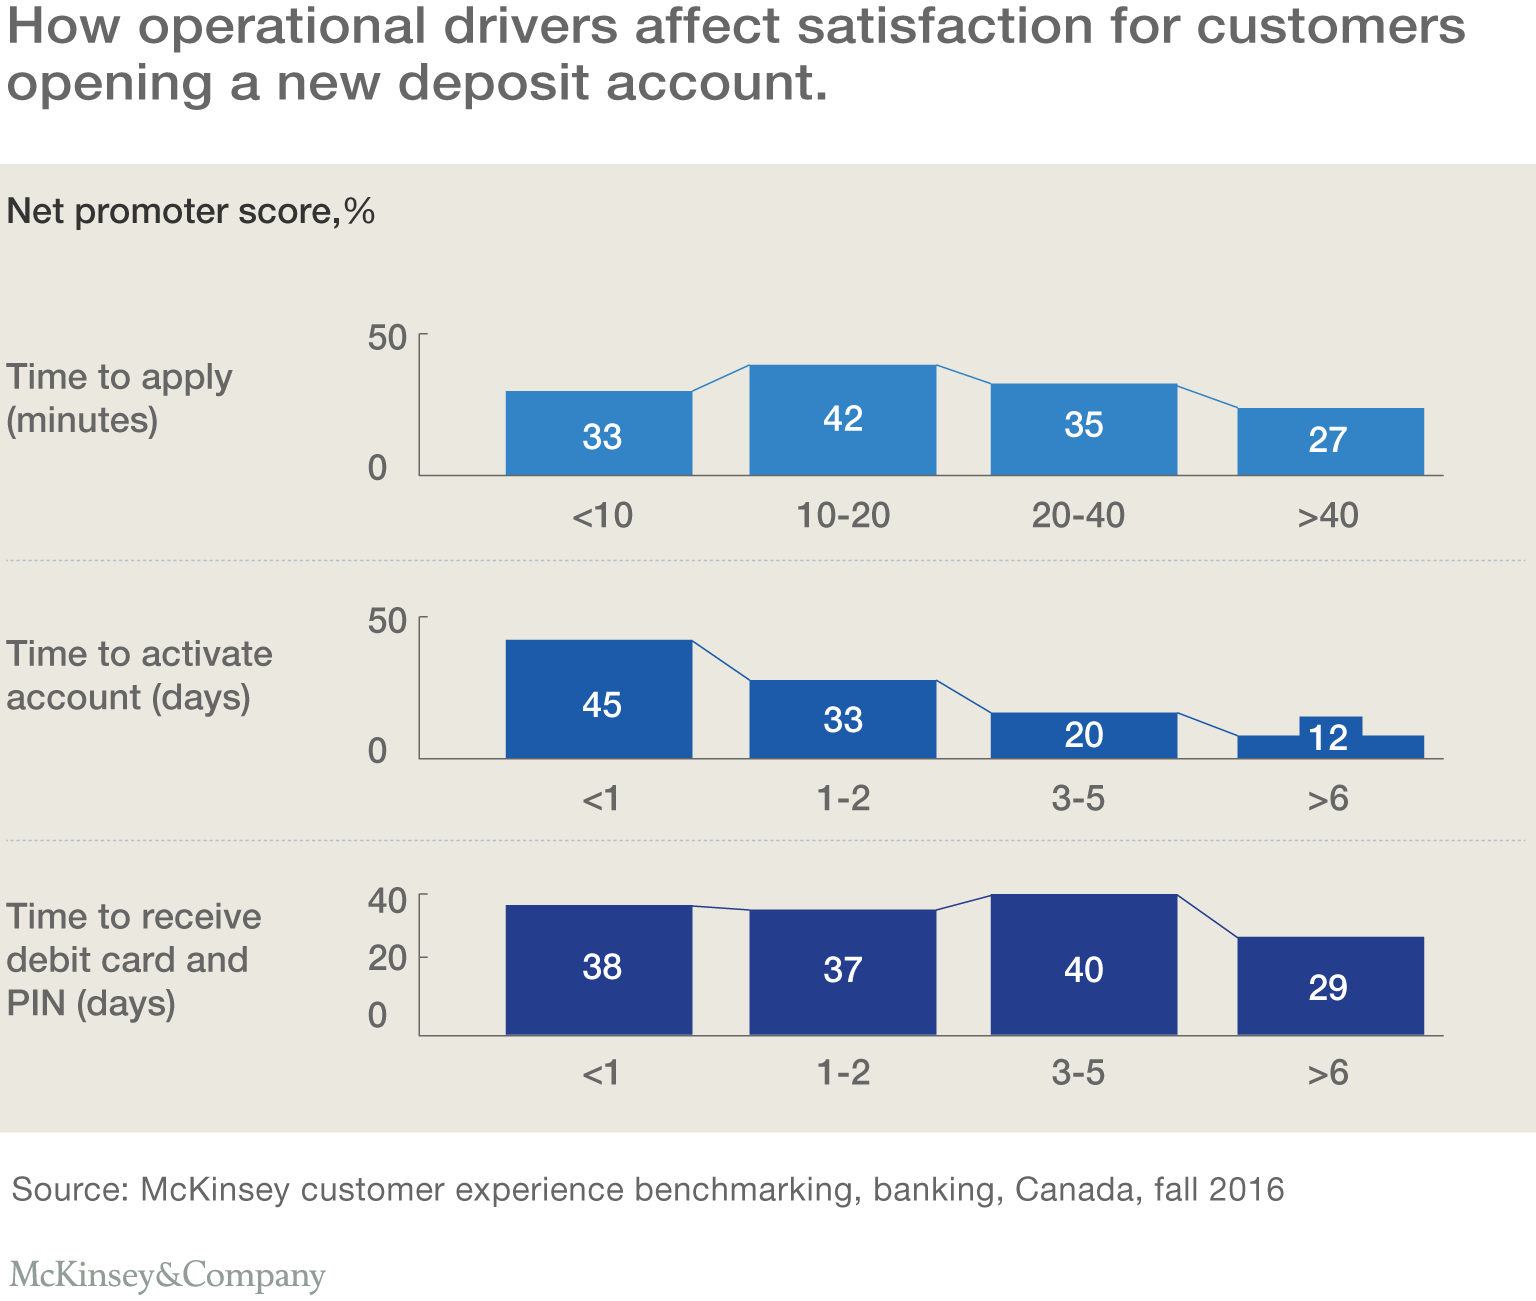 How operational drivers affect satisfaction for customers opening a new deposit account.